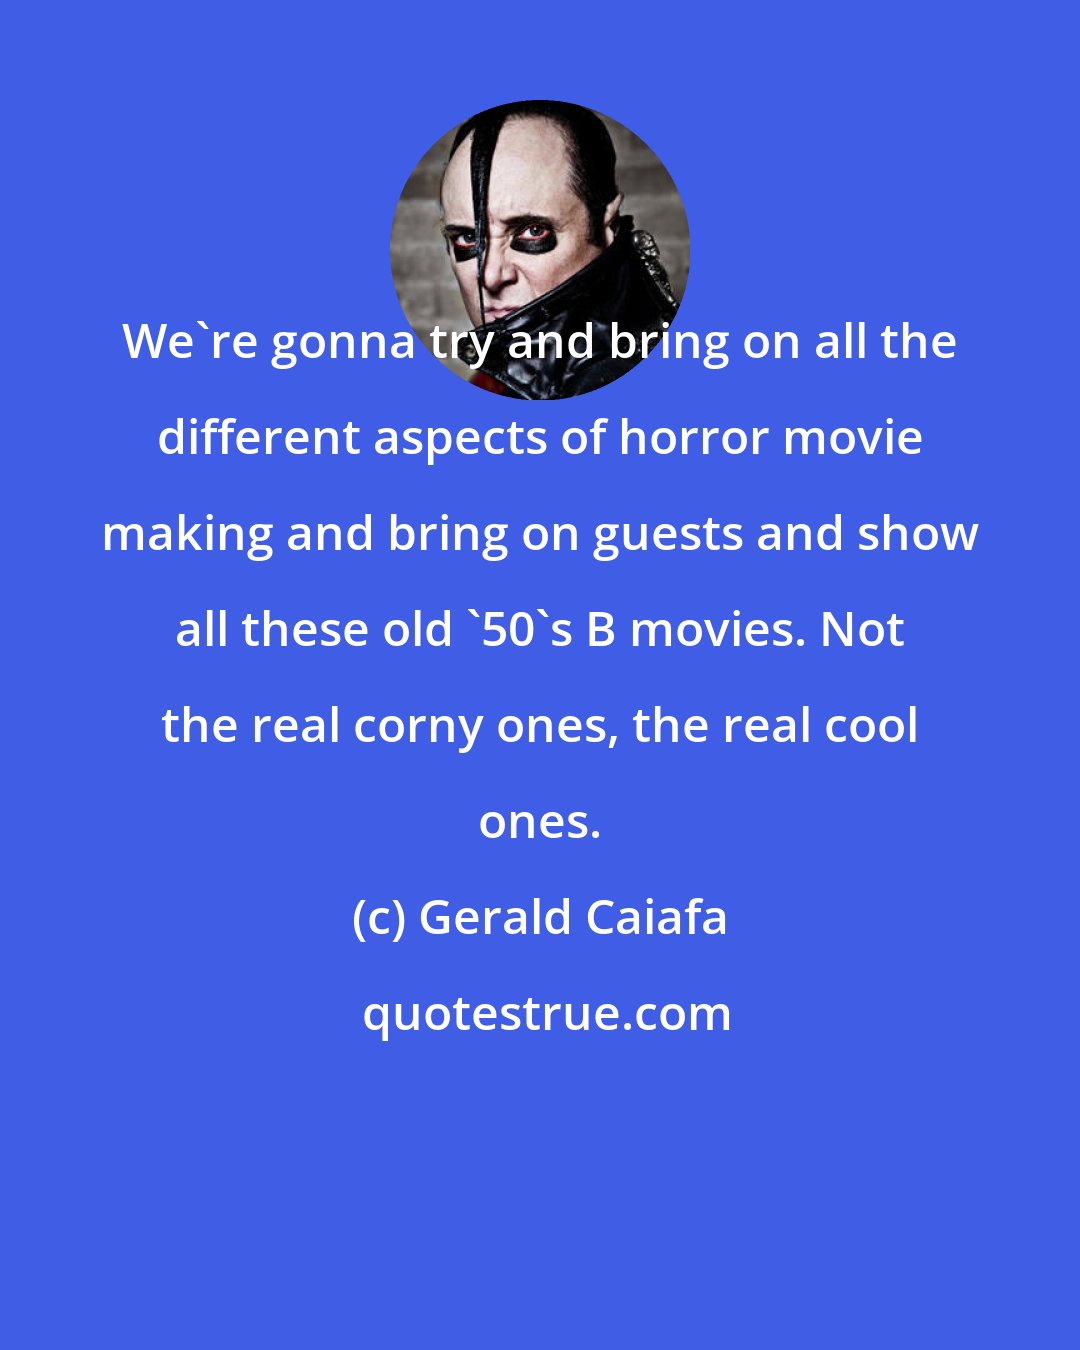 Gerald Caiafa: We're gonna try and bring on all the different aspects of horror movie making and bring on guests and show all these old '50's B movies. Not the real corny ones, the real cool ones.